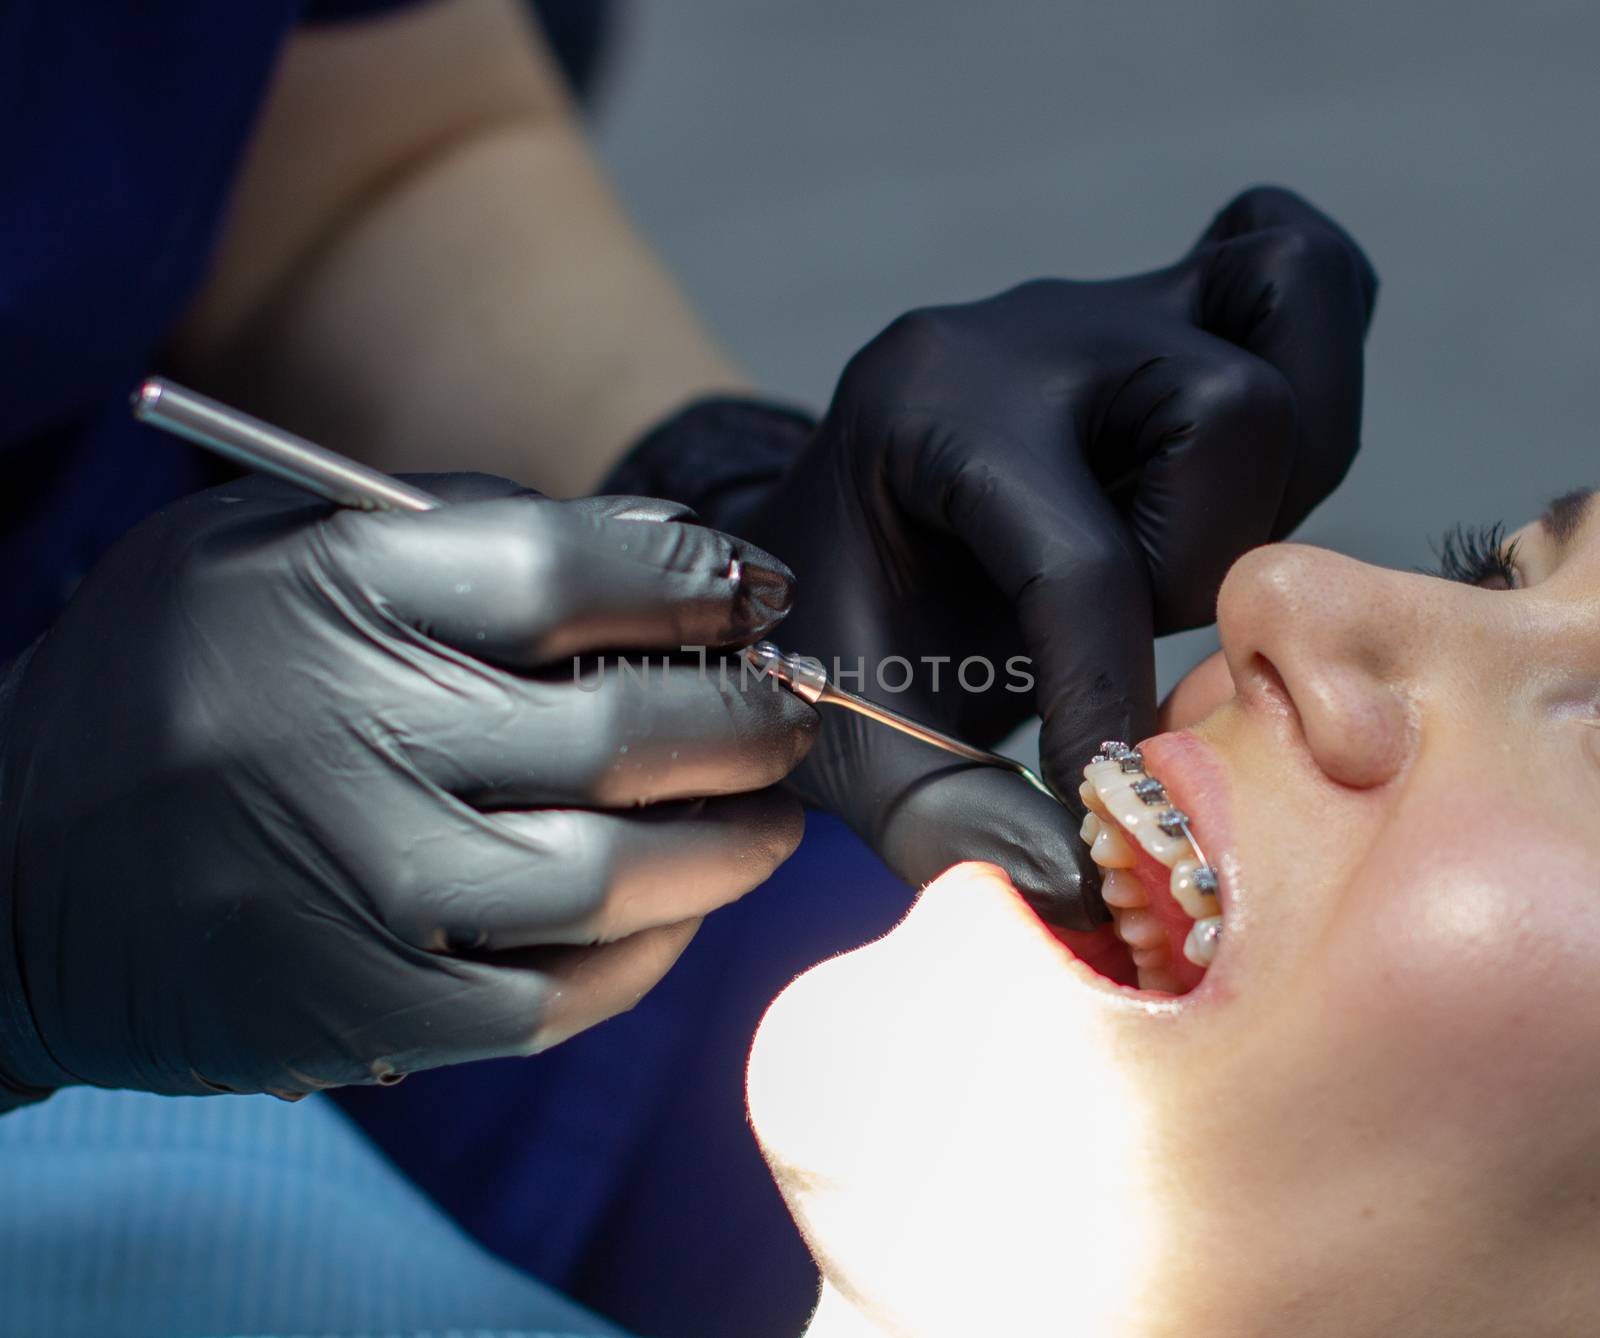 woman with braces visits an orthodontist, in a dental chair.during the procedure of installing the arch of braces on the upper and lower teeth.The dentist is wearing gloves and has tools in his hands.